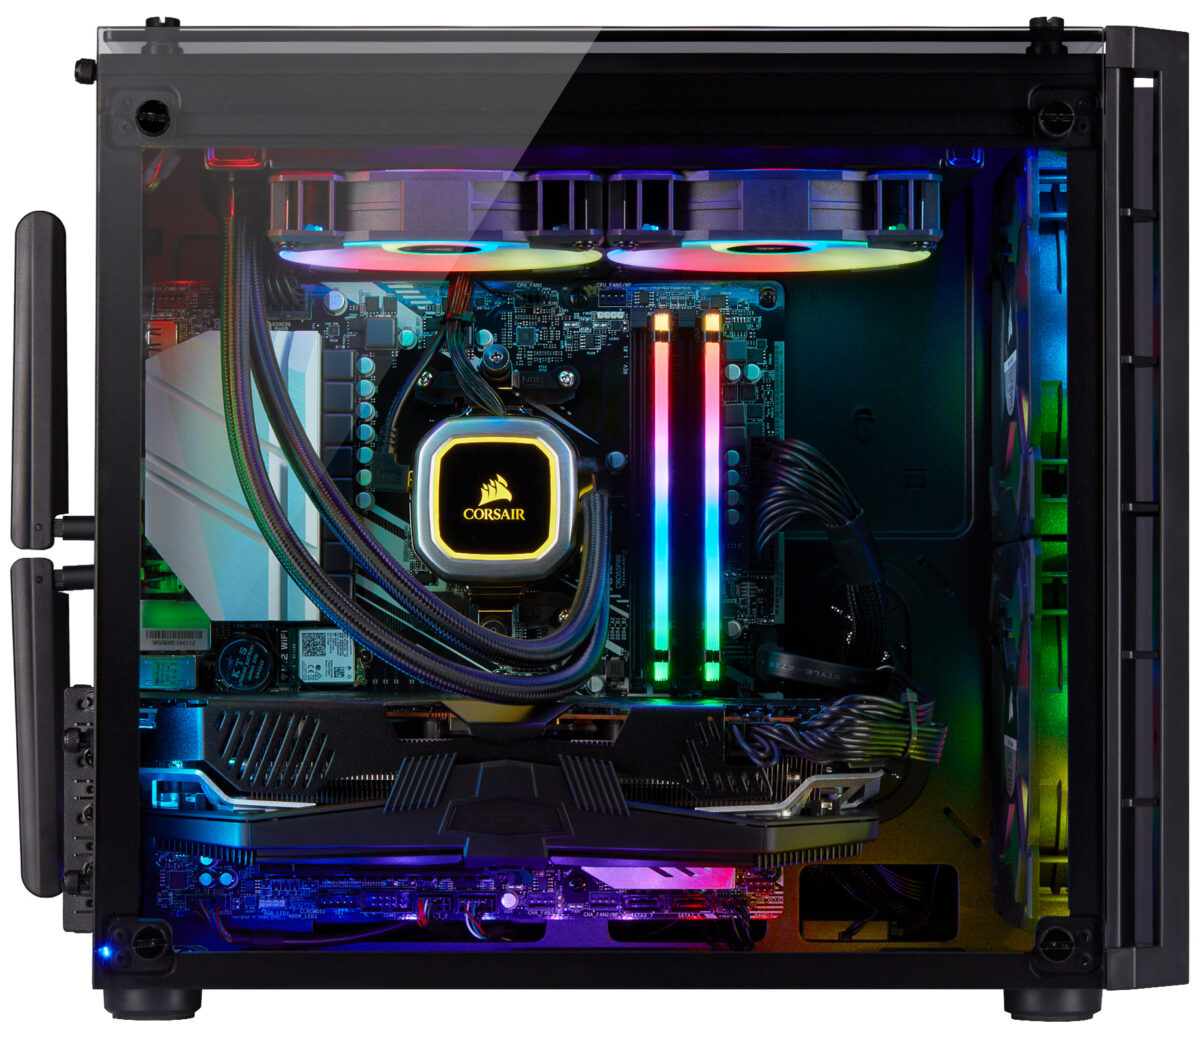 Corsair Adds AMD CPUs and GPUs To Its VENGEANCE PC Line – Techgage